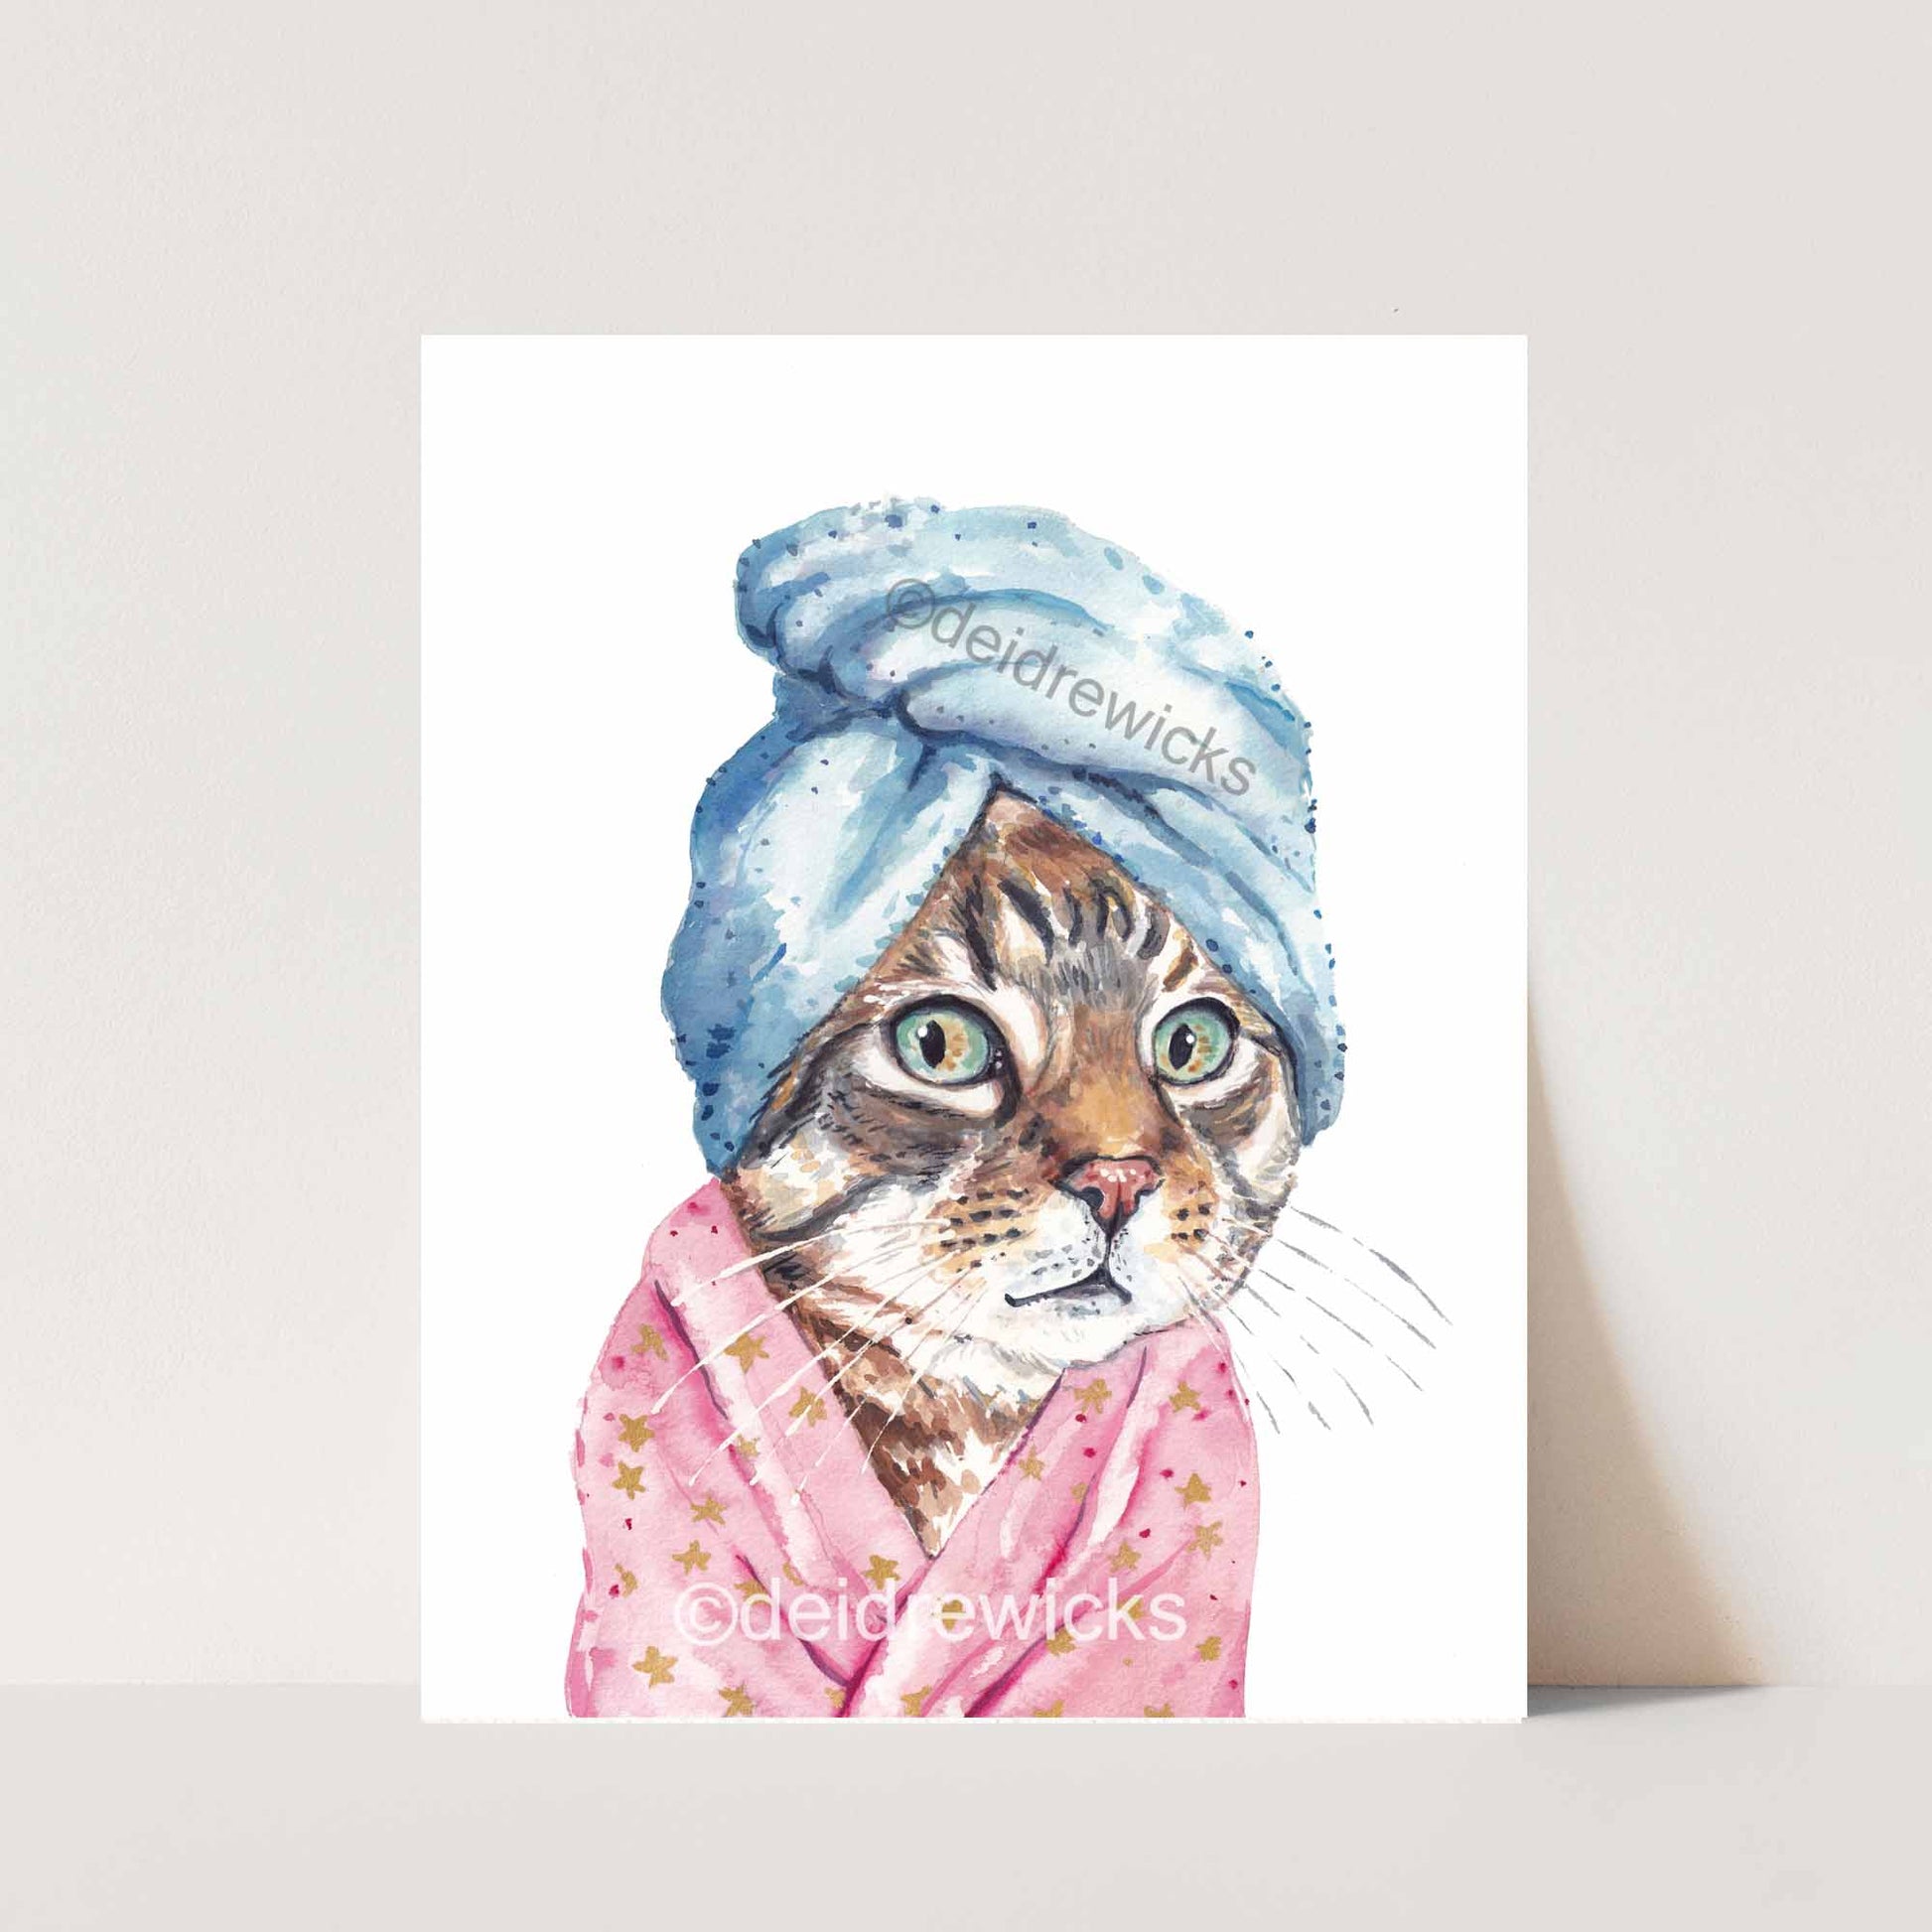 Watercolor print of a brown tabby cat wearing a bath towel on it's head and a soft, pink bathrobe. Copyright Deidre Wicks